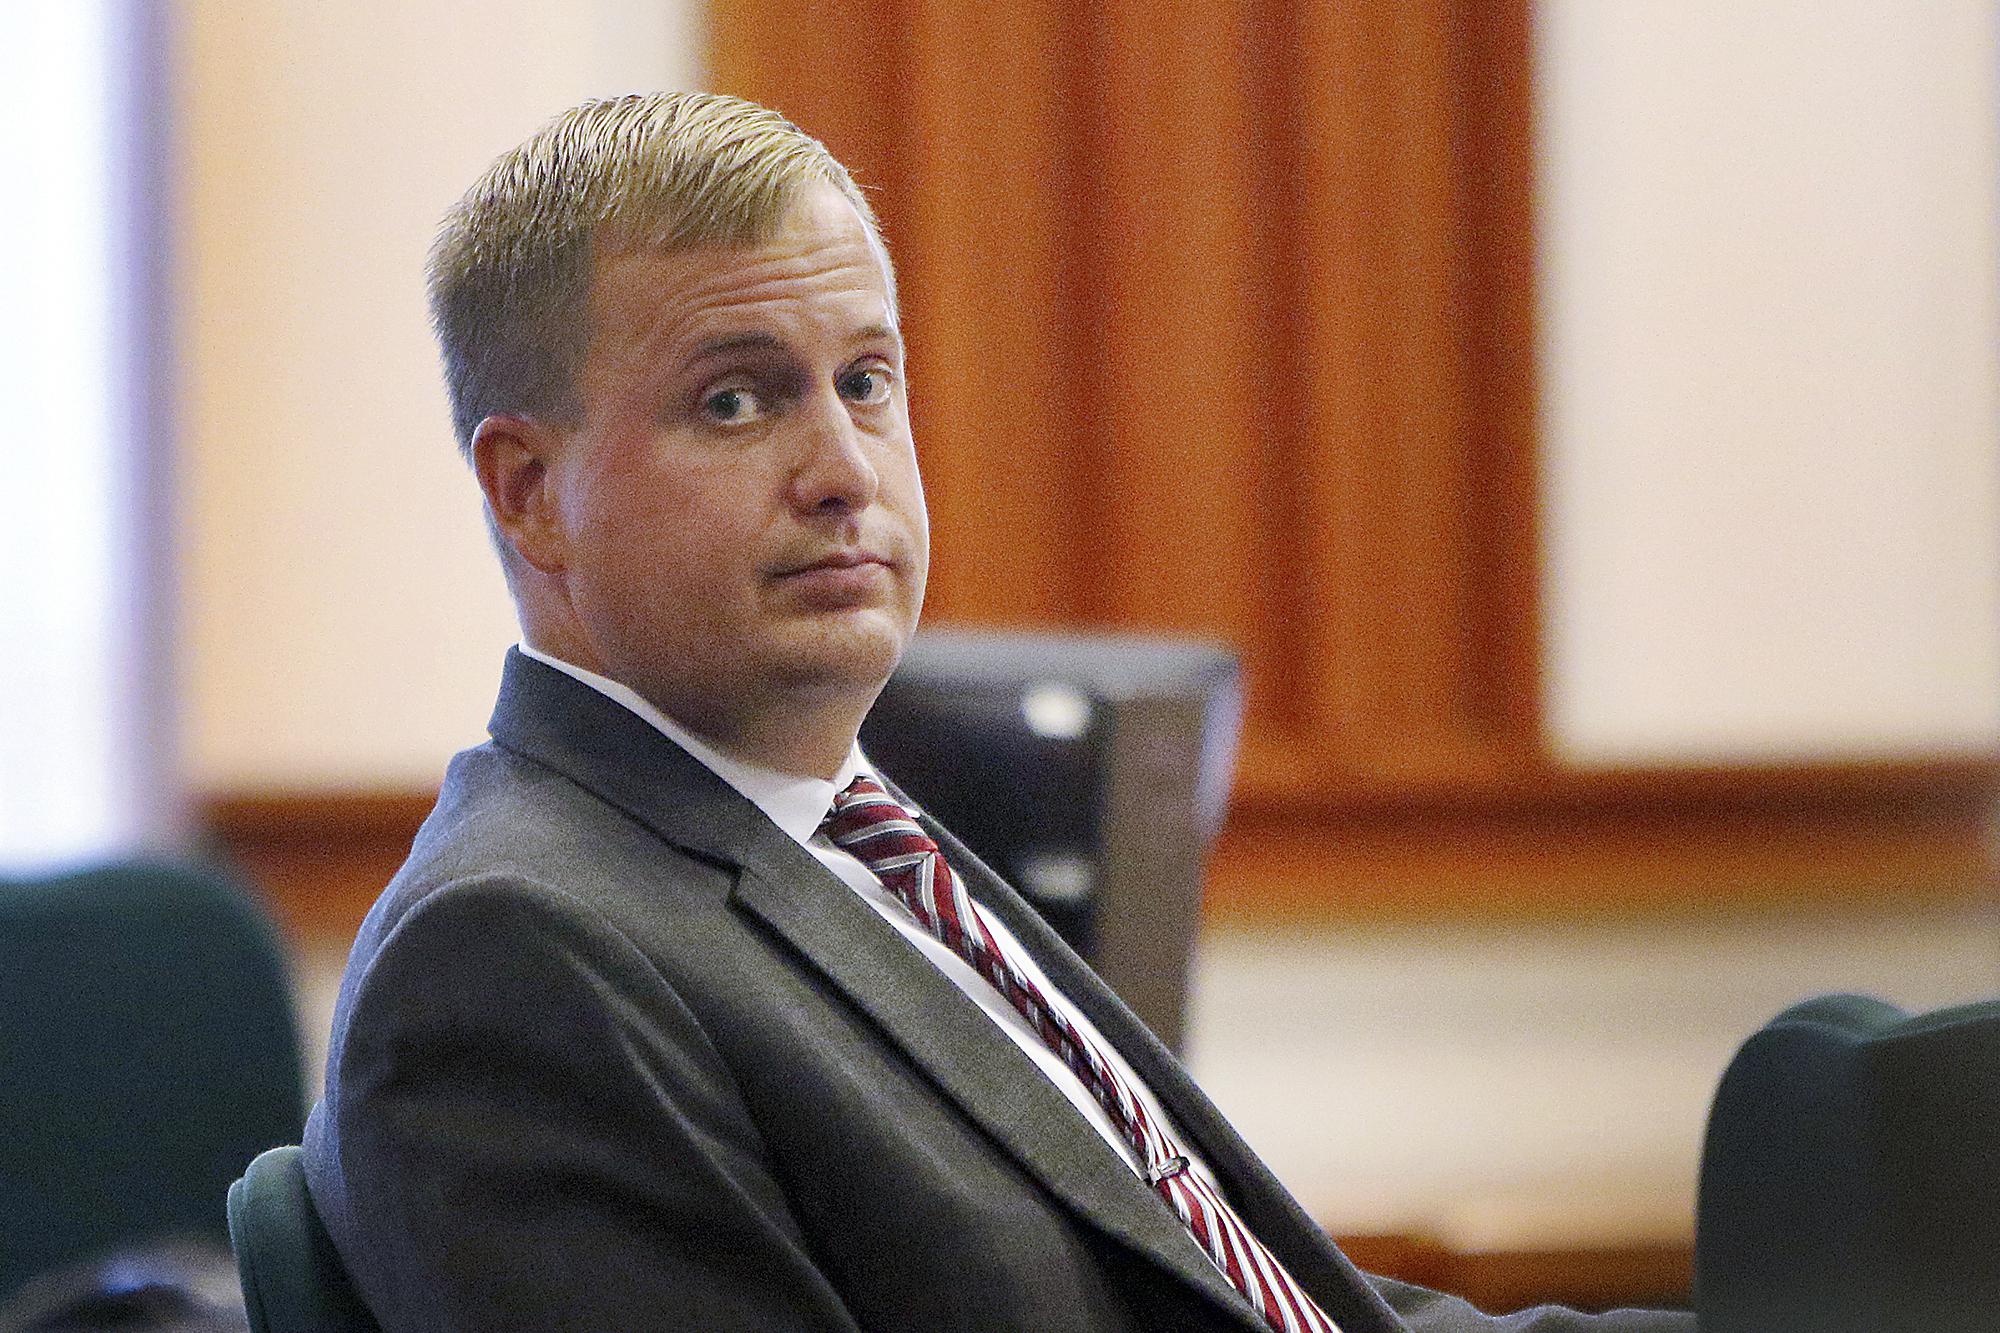 Former Idaho lawmaker found guilty of raping intern